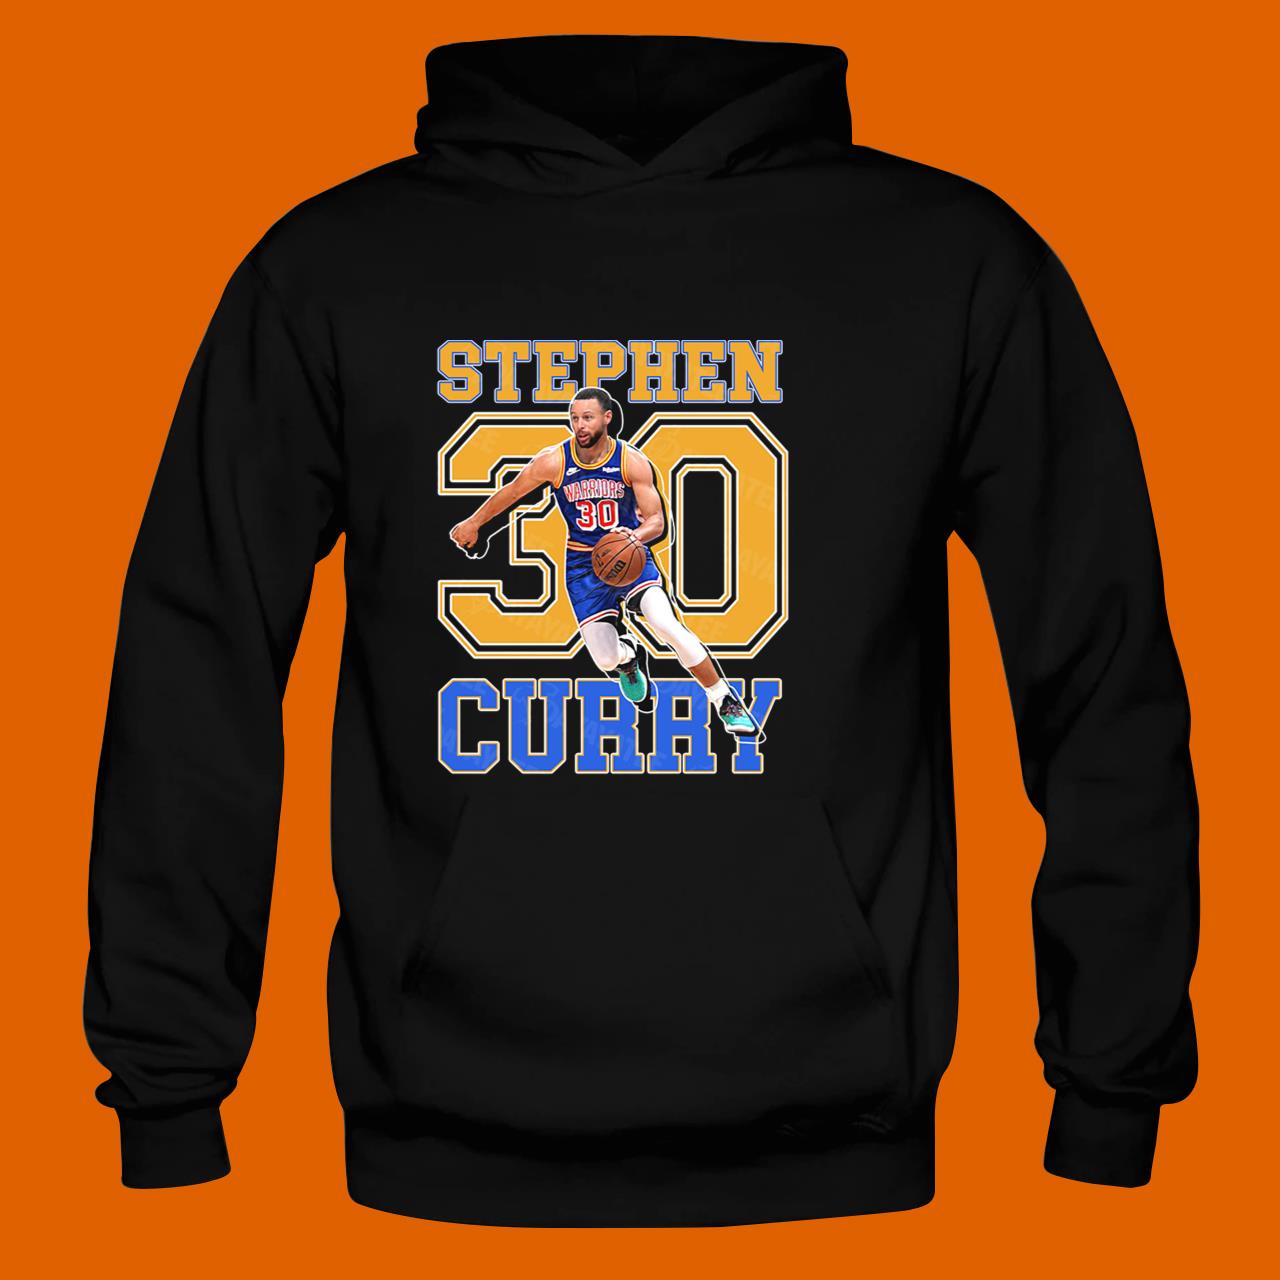 Golden State Warriors Stephen Curry T Shirt LeBron James Play With Steph Curry